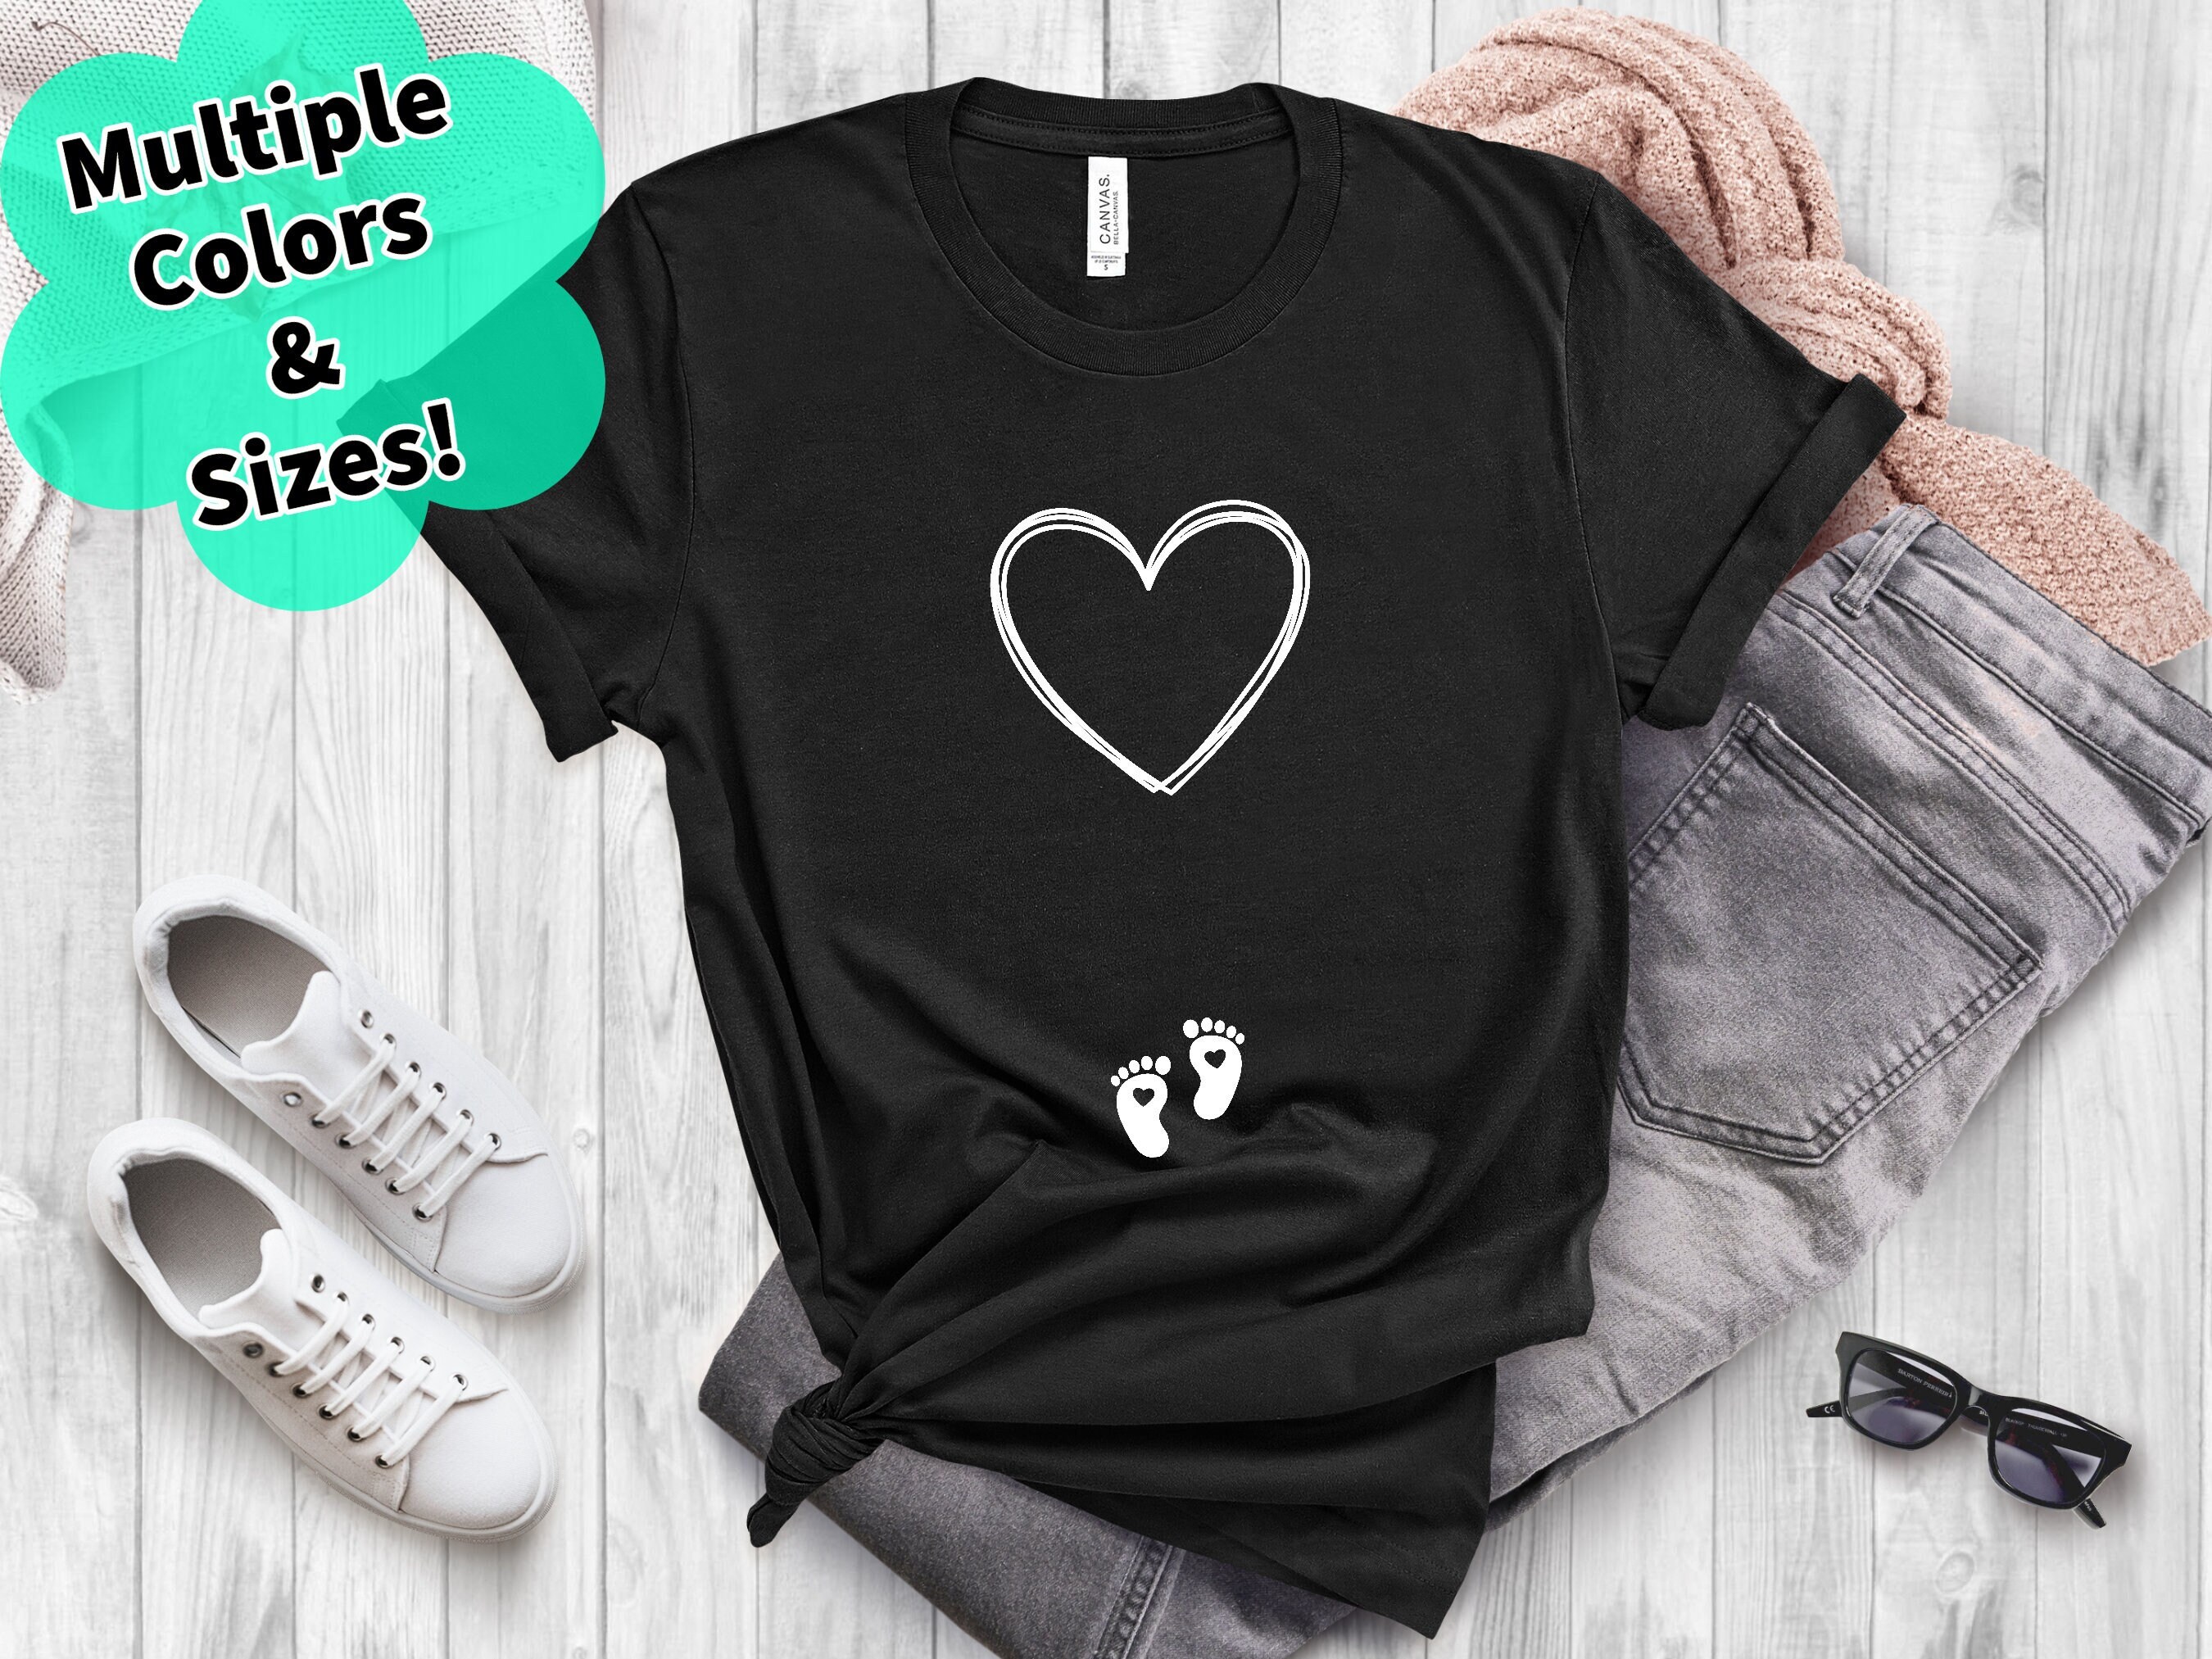 TWBshirts Pregnancy Announcement Shirt Baby Shower Gift Ideas Baby Reveal Shirt Pregnancy Reveal Shirt Pregnancy Gift Newborn Mother Tshirt Expecting